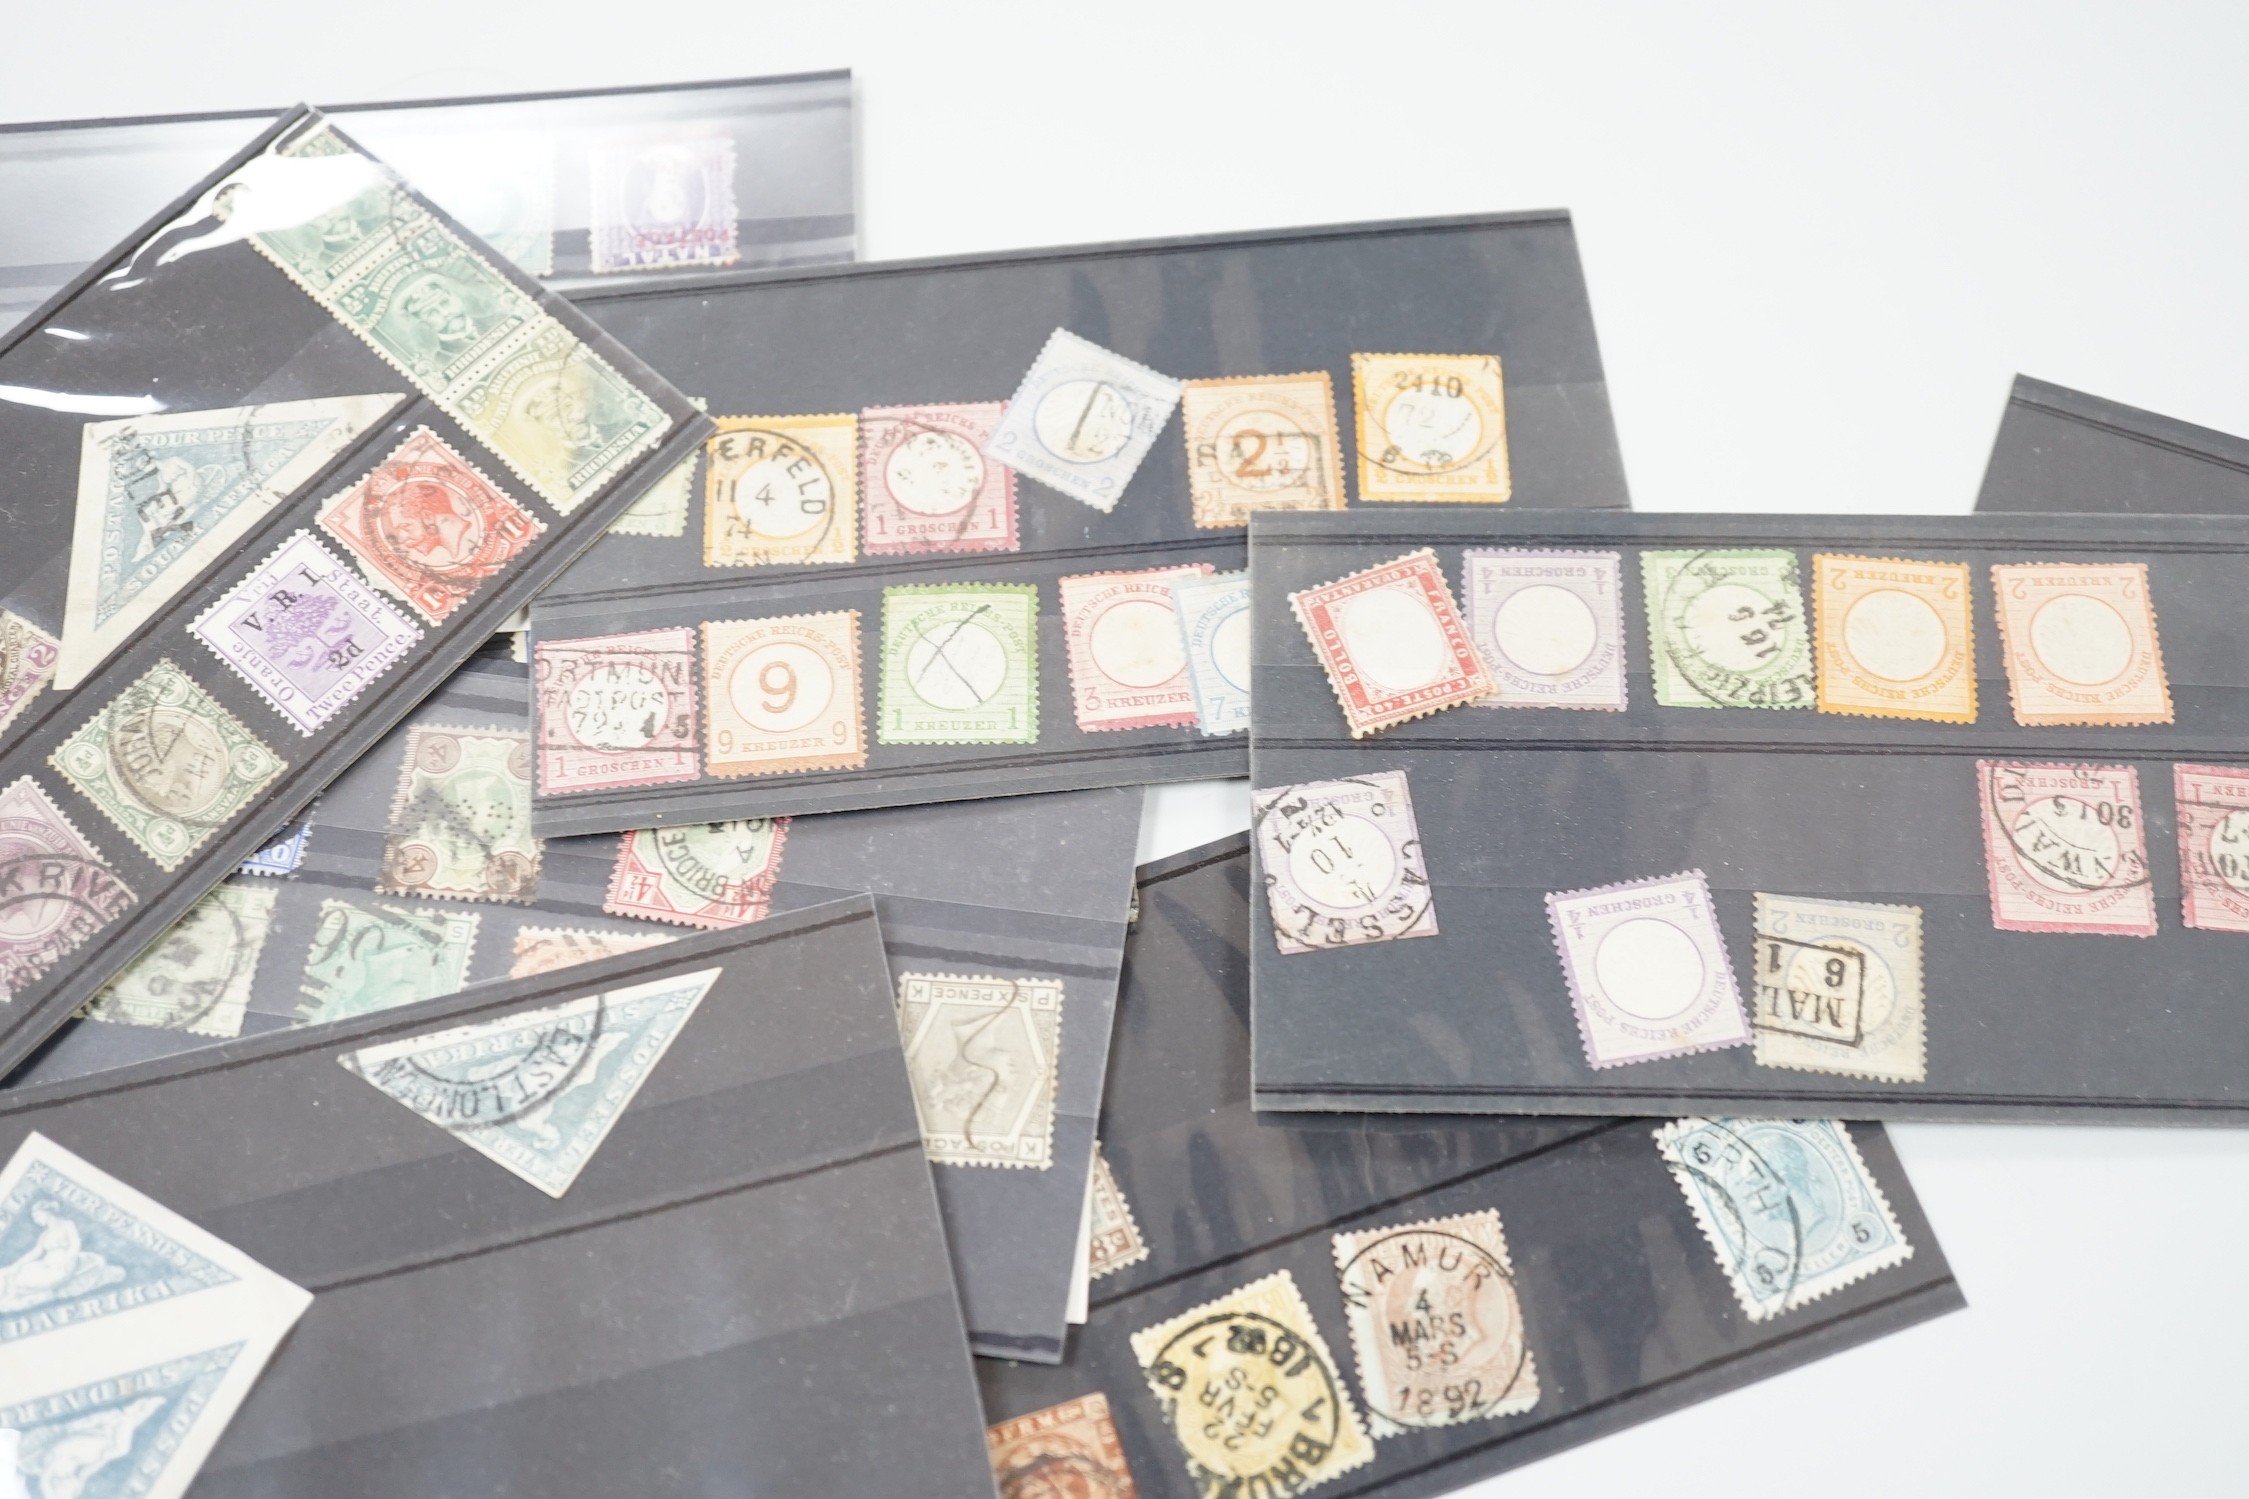 Mixed stamps including Penny Black, Edward VIII 3 shilling booklet, some on stock cards, others mounted